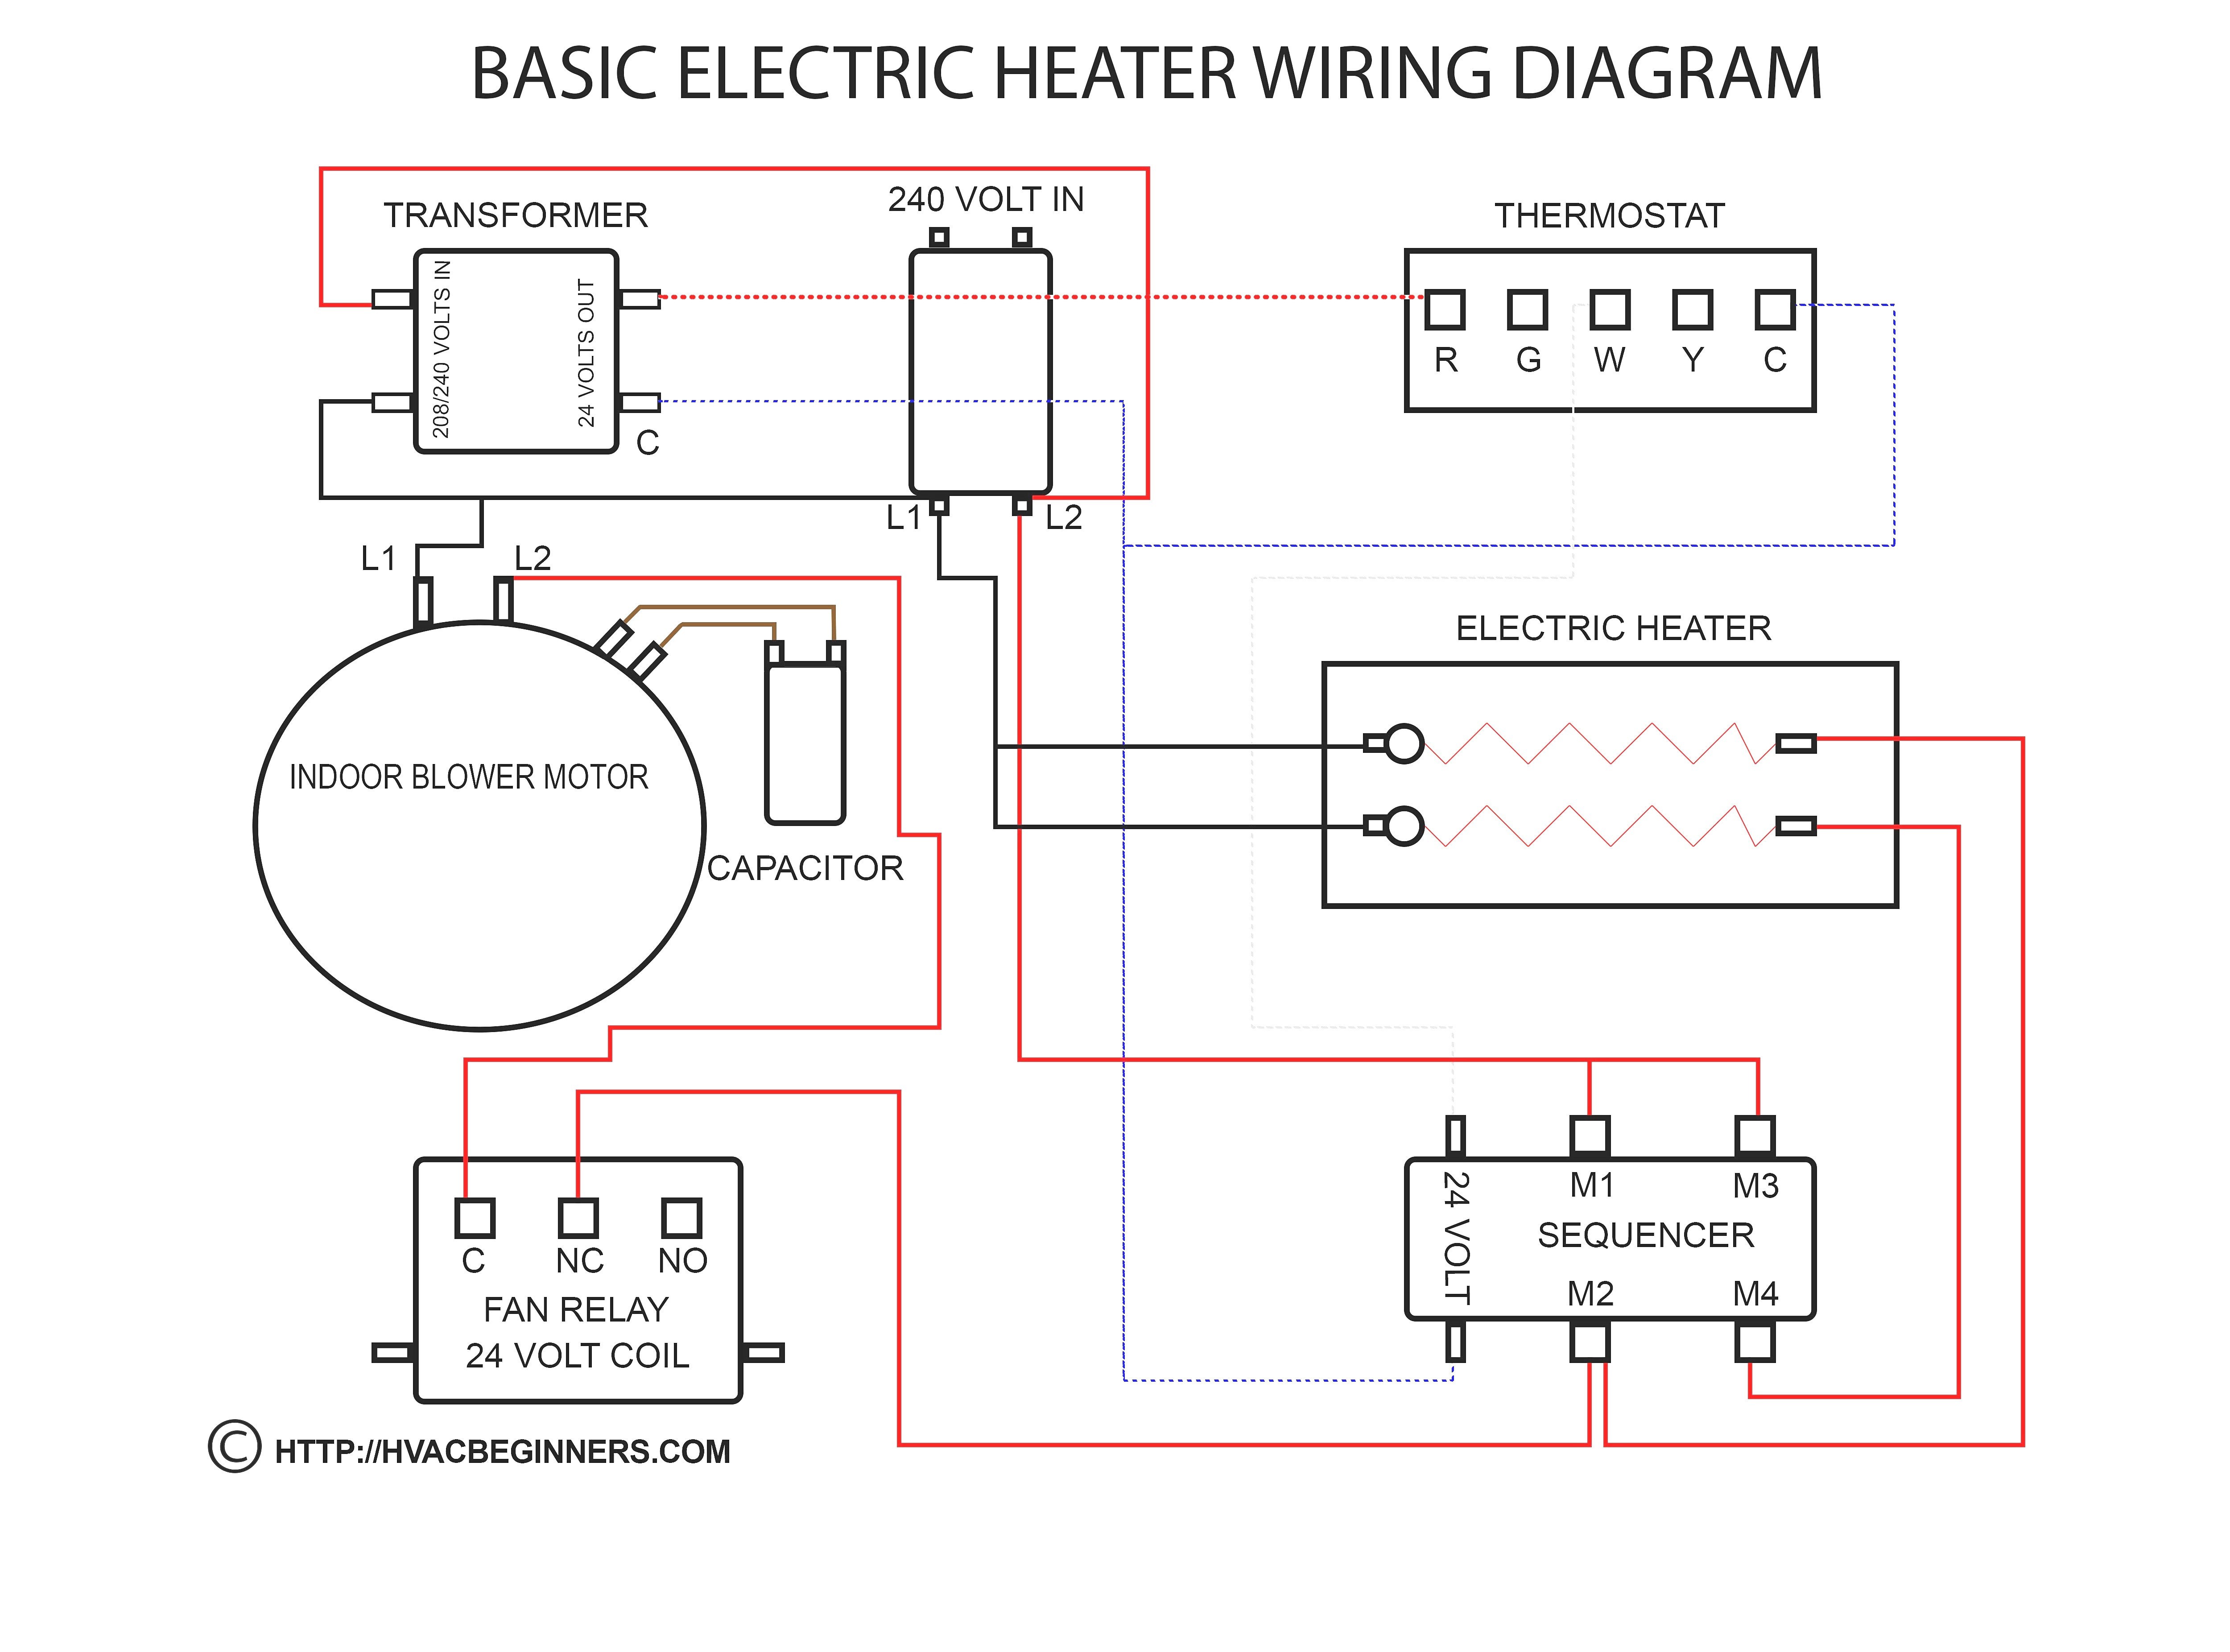 Wiring Diagram For Thermostat With Heat Pump Fresh Rheem Heat Pump Thermostat Wiring Chromatex